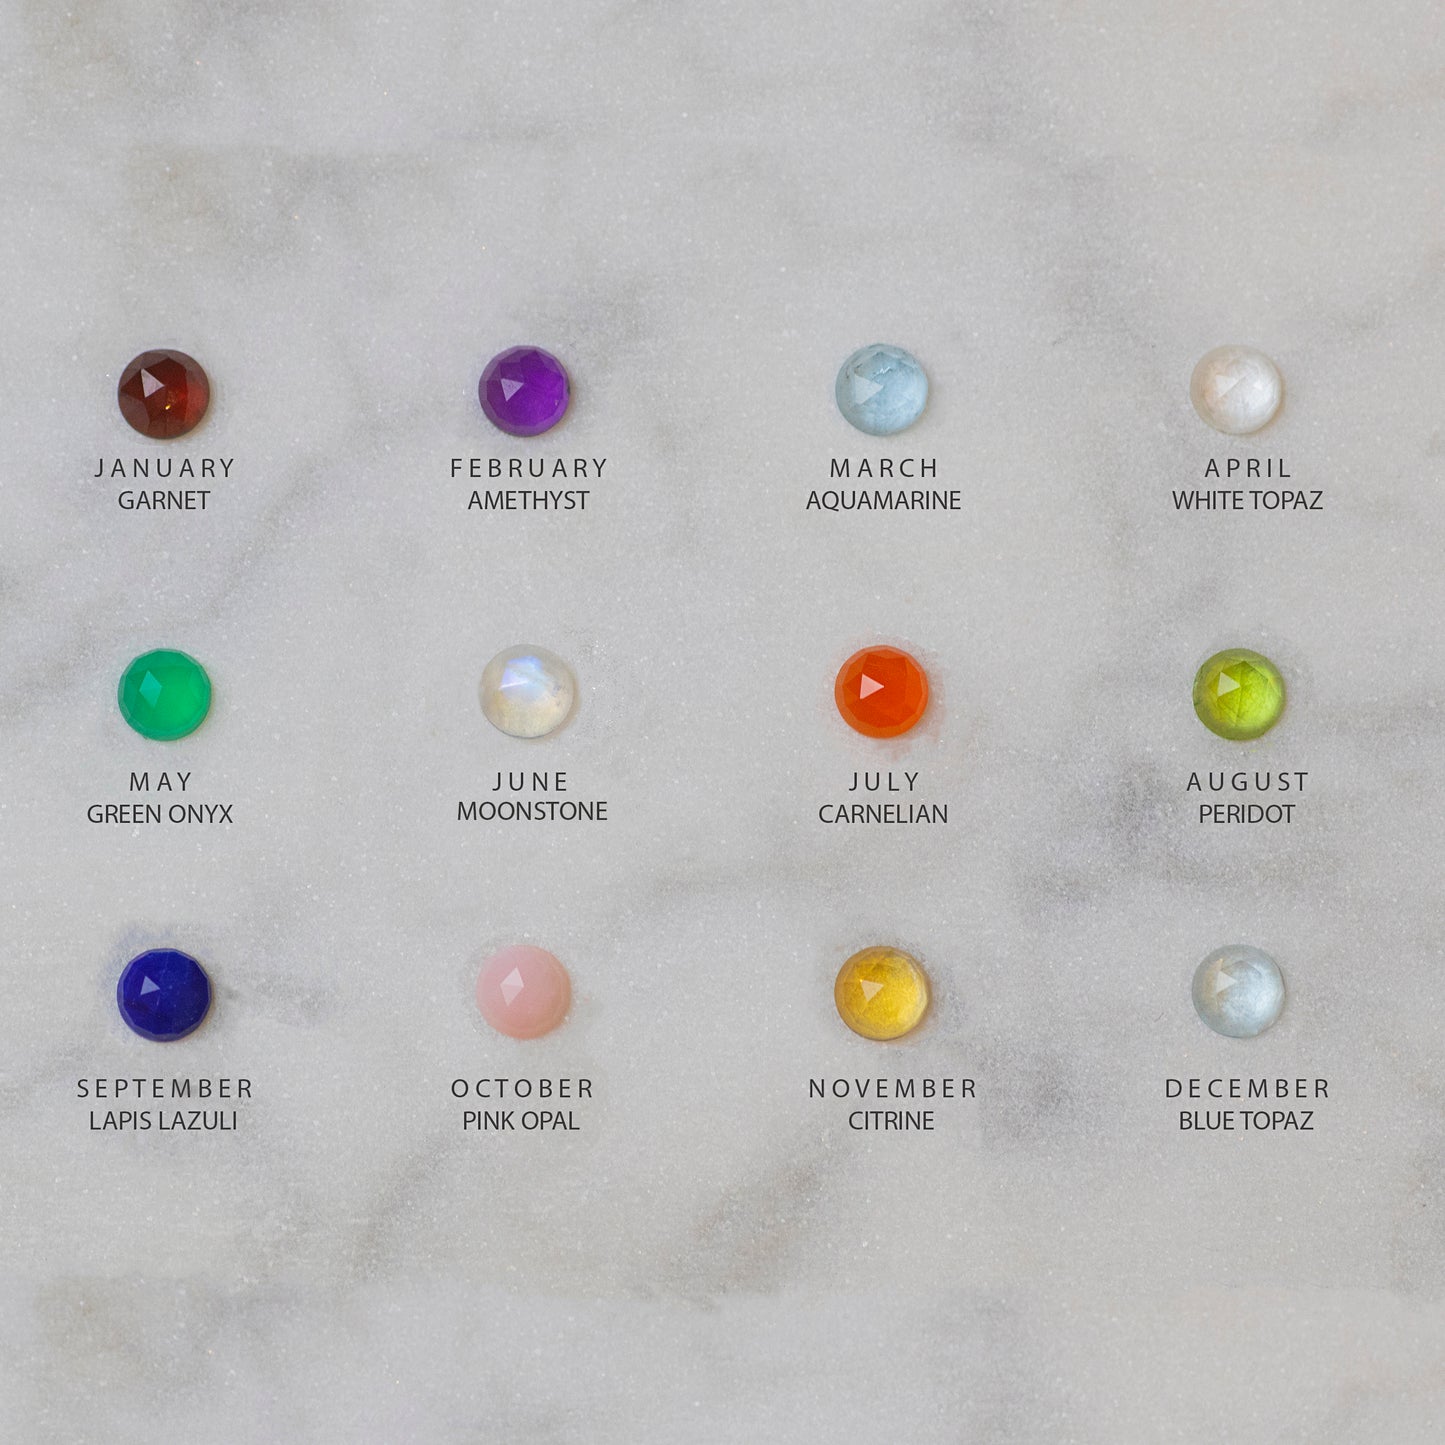 90th Birthday Birthstone Earrings - The Original 9 Links for 9 Decades - Petite Silver